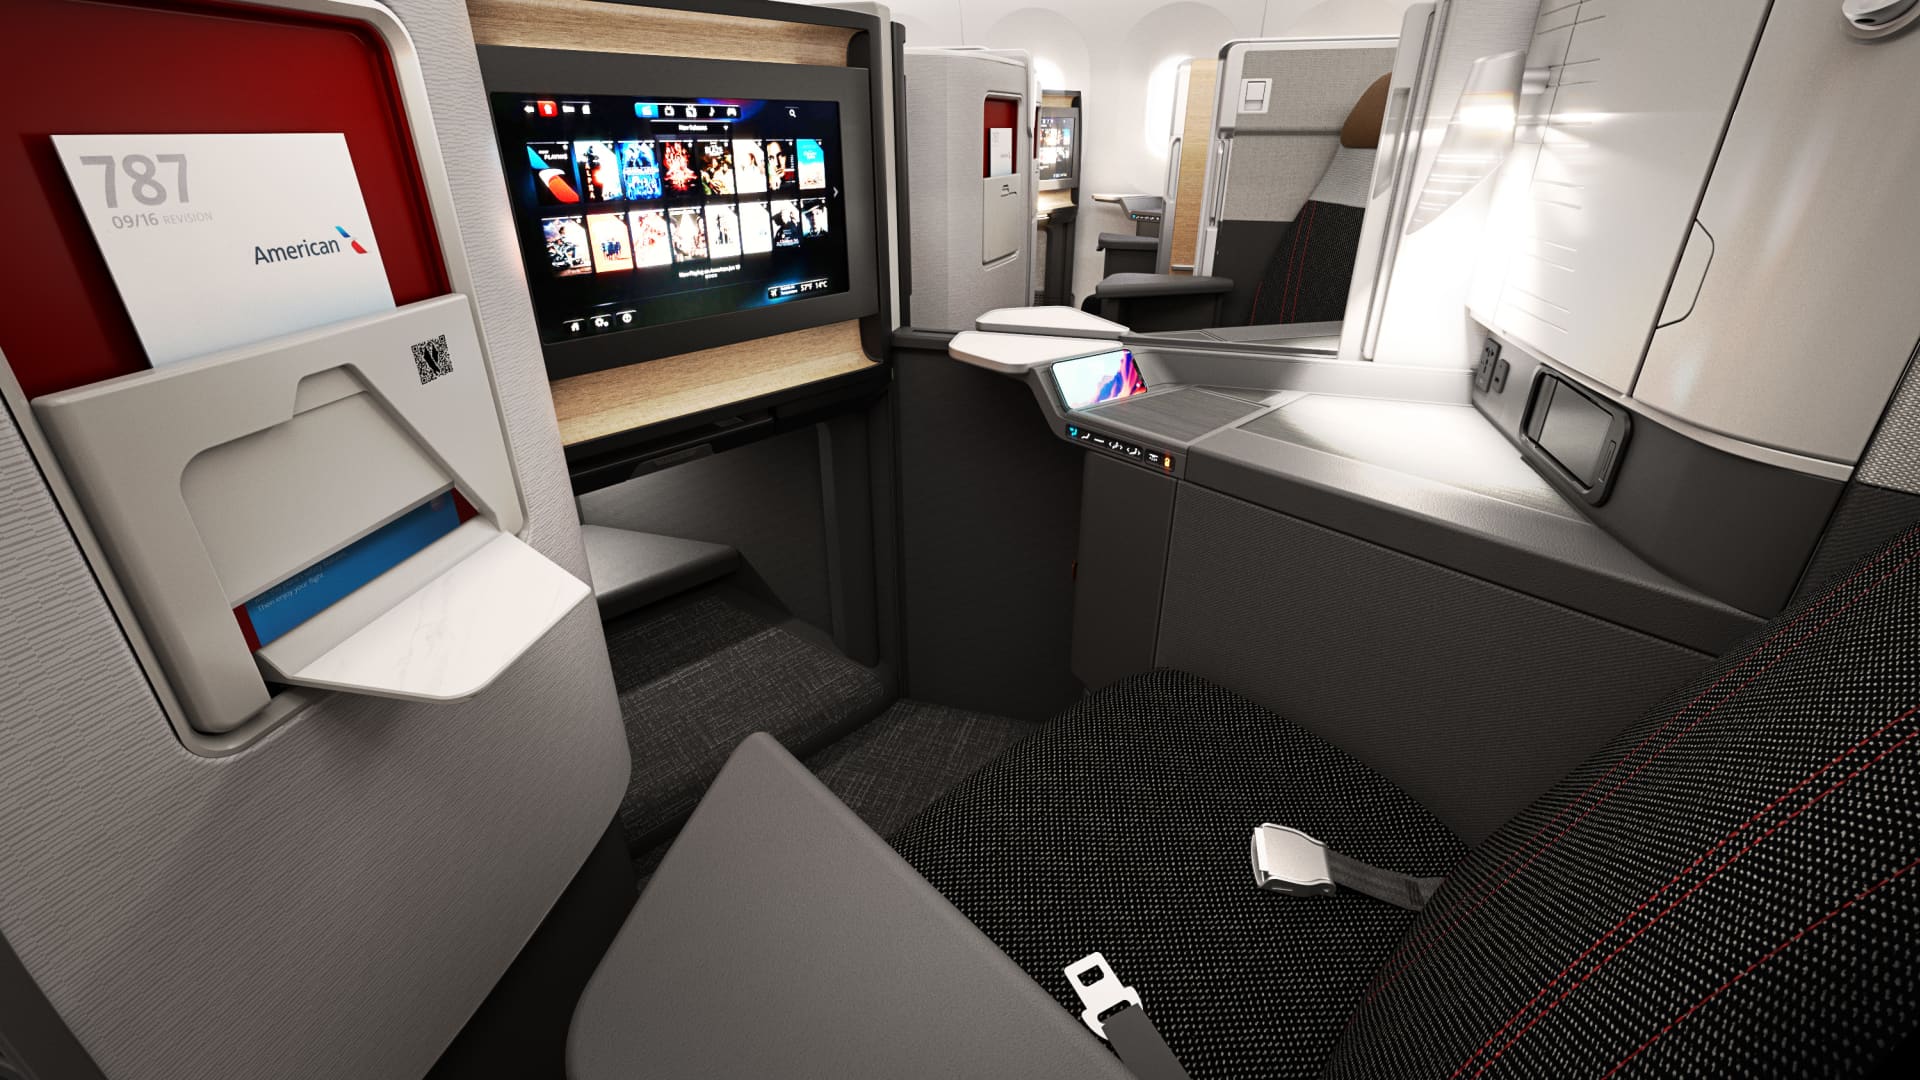 American Airlines plans premium suites in race for high-paying travelers